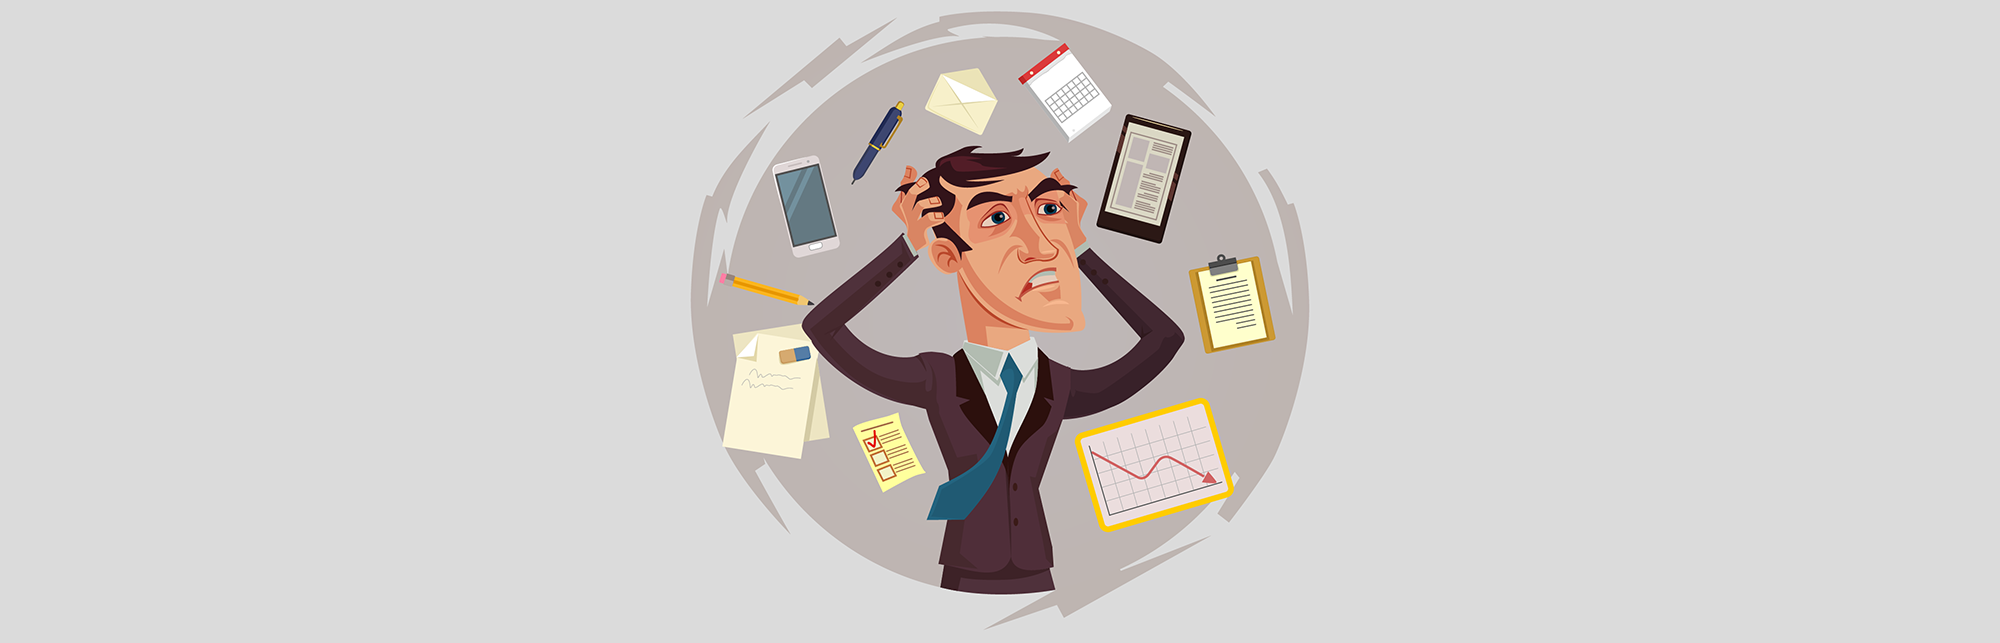 Handling Stress During a Job Search